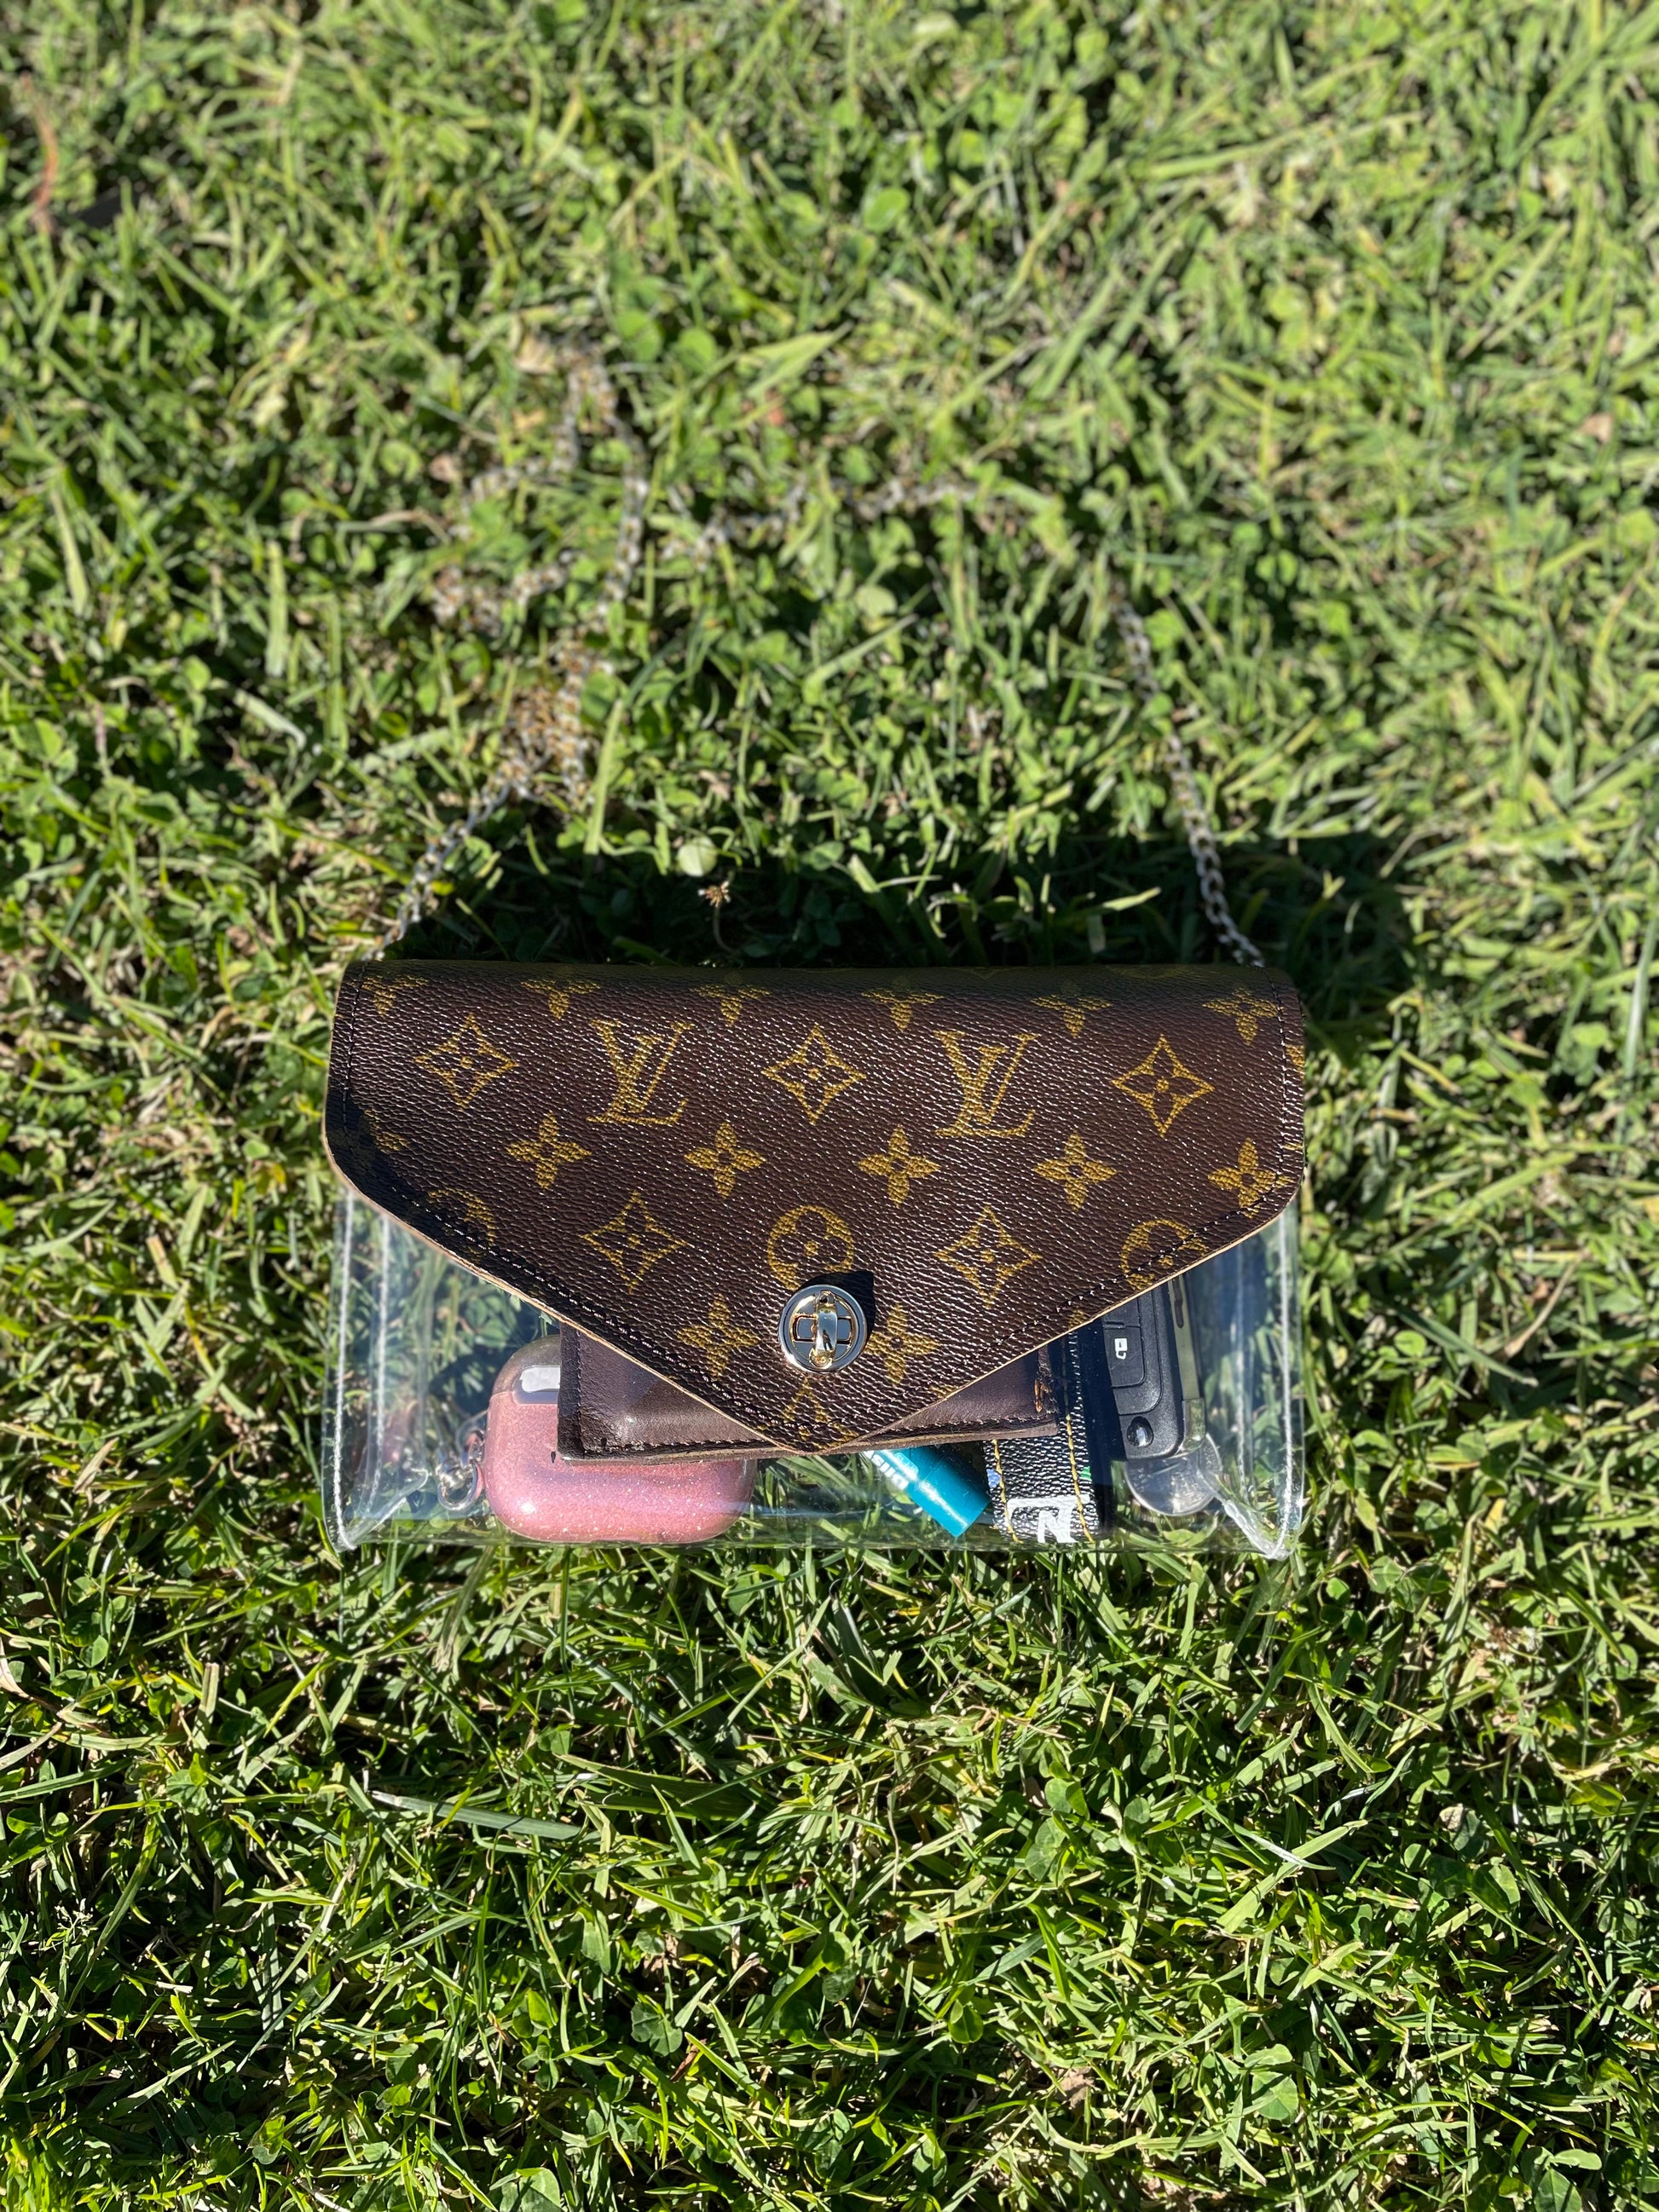 Stadium approved clear bag  Bags, Clear bags, Louis vuitton twist bag